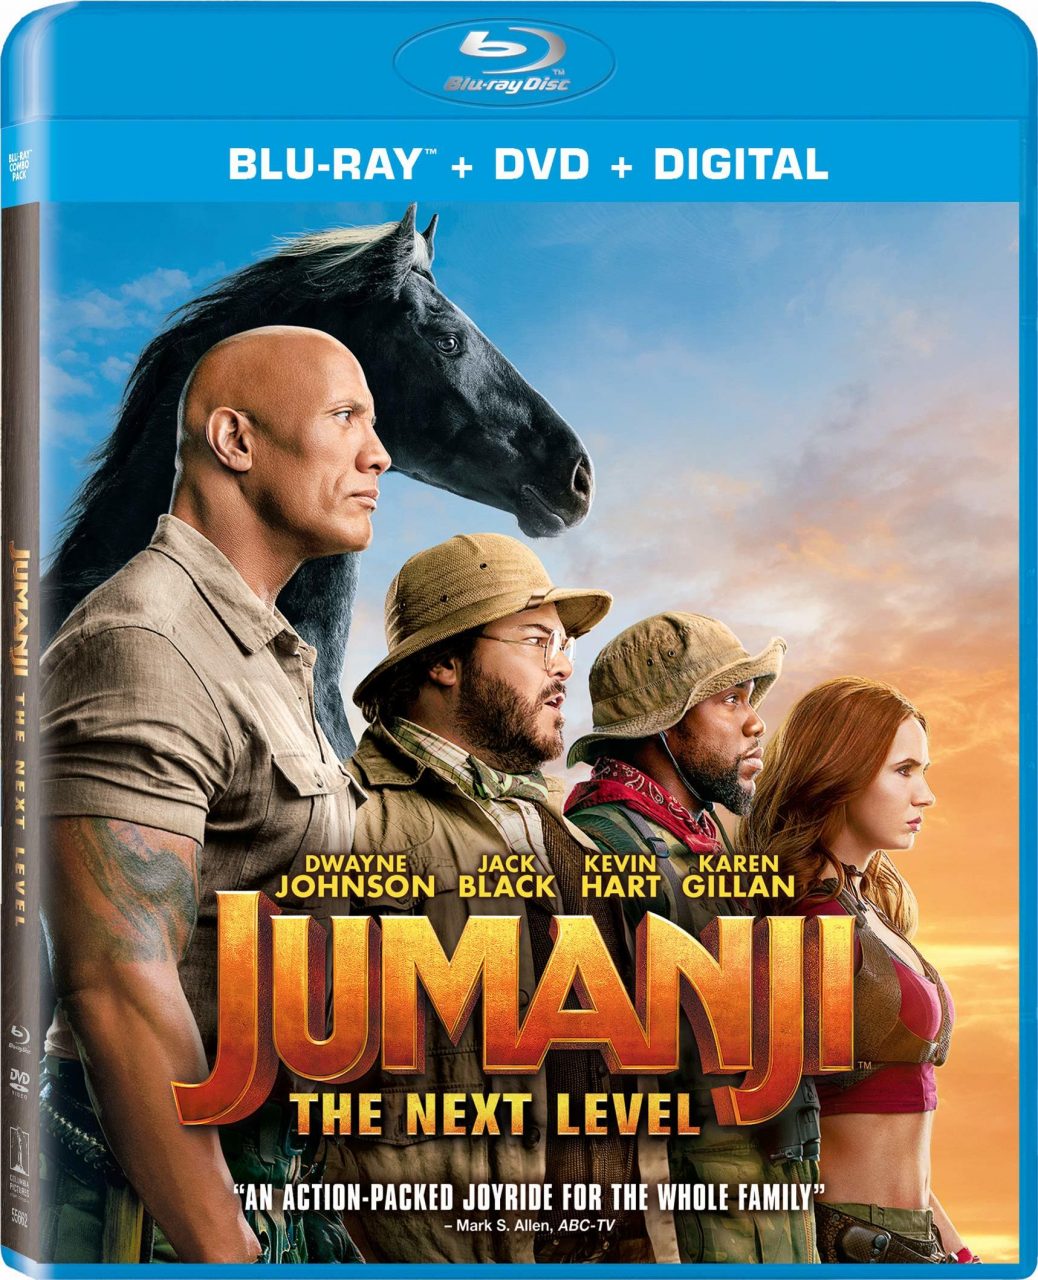 Jumanji: The Next Level Blu-Ray Combo Pack cover (Sony Pictures Home Entertainment)